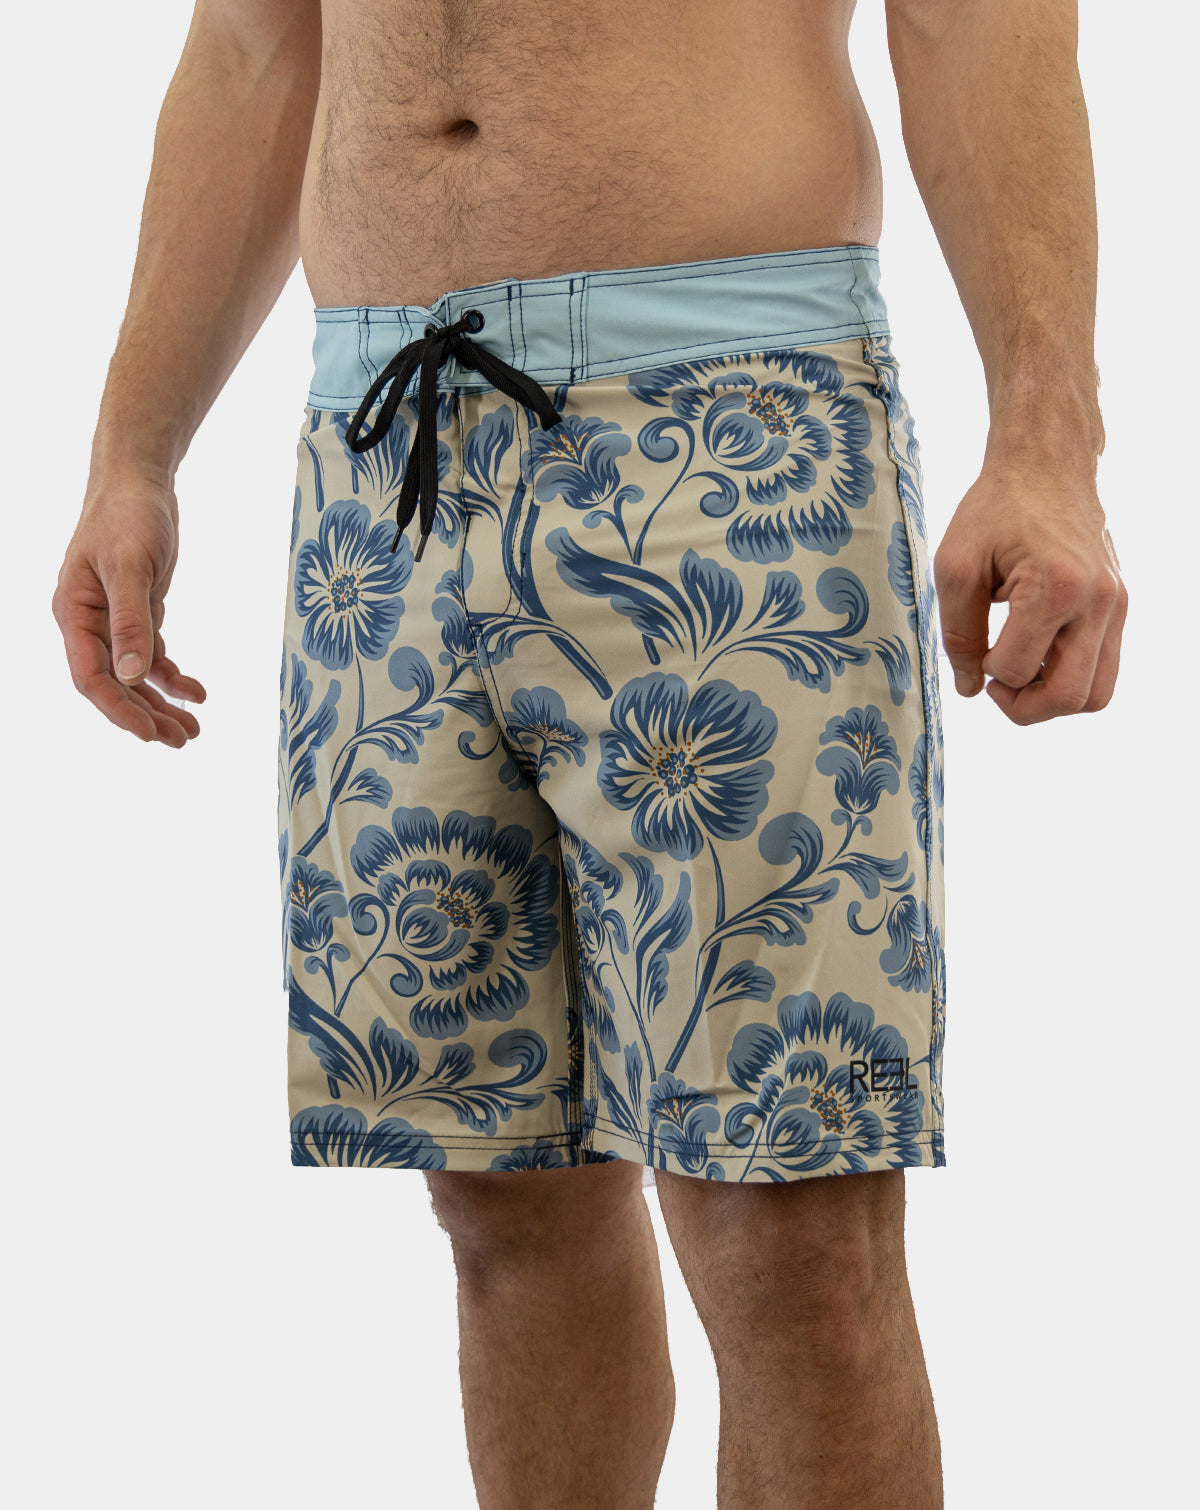 Stylish Sturgill Men&#39;s Boardshorts featuring bold floral print in shades of blue and antique white.